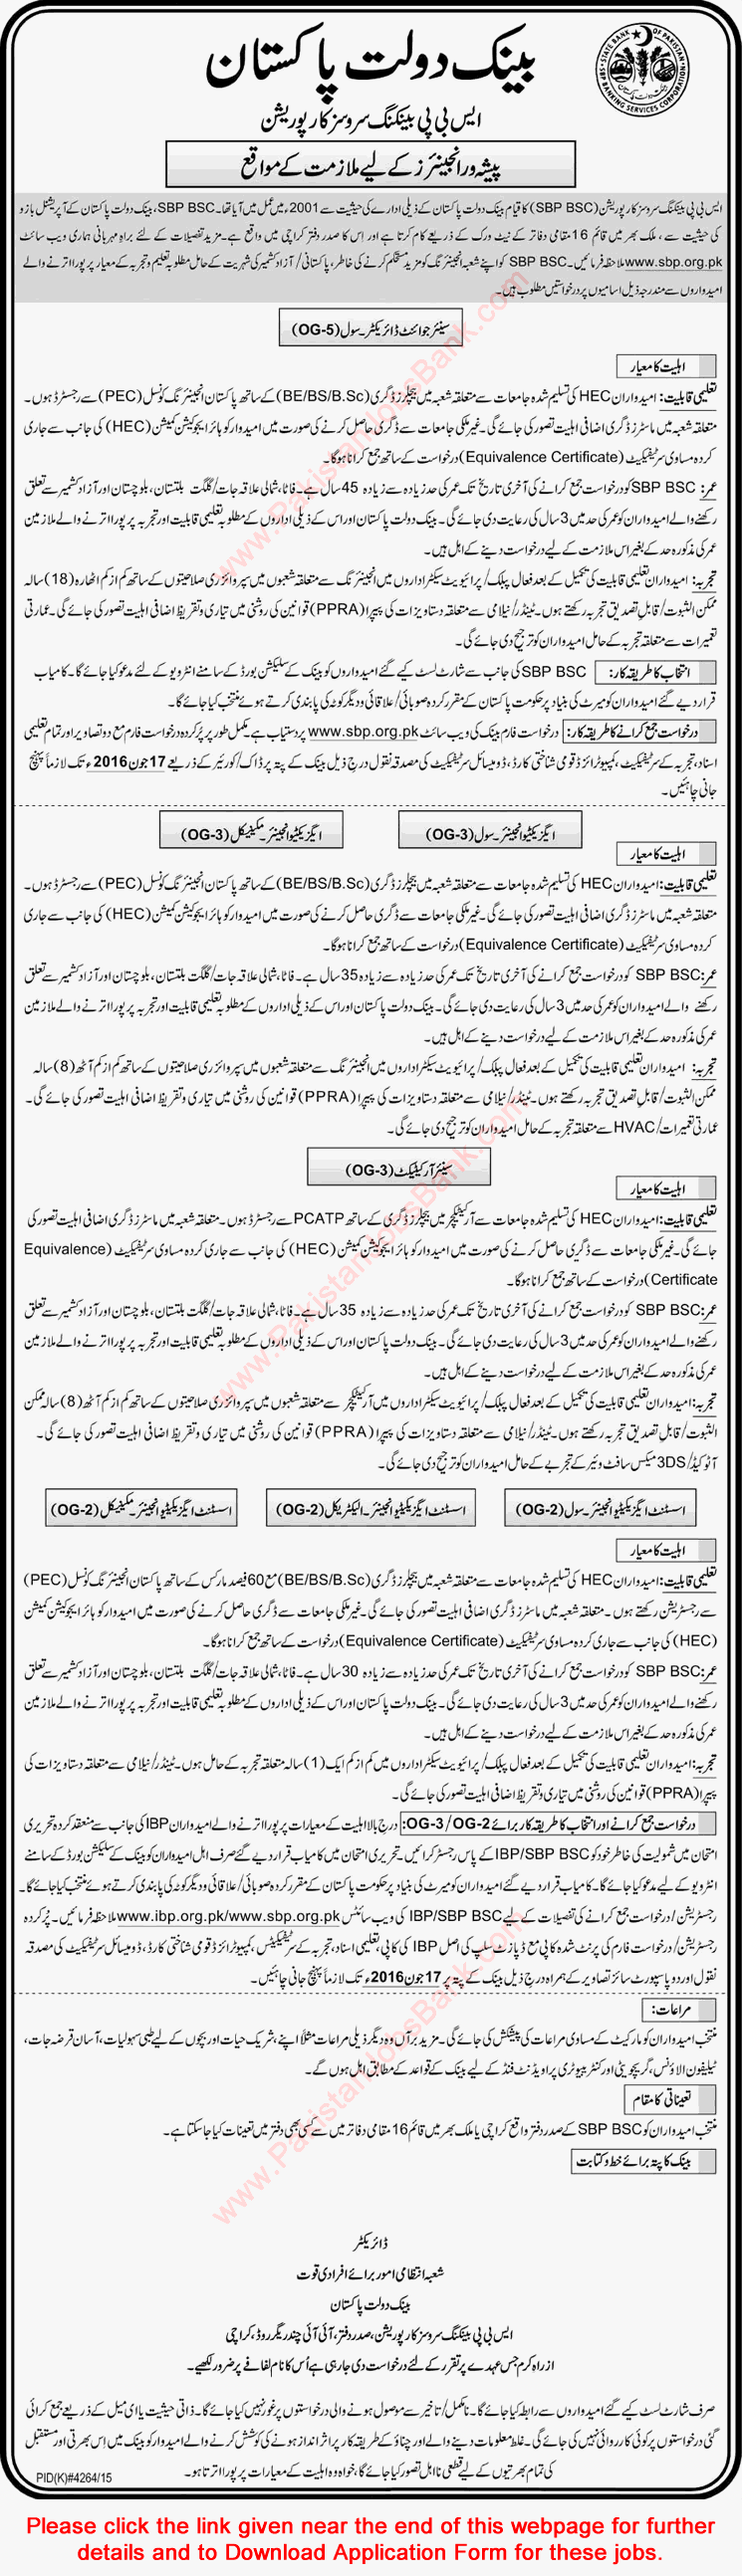 State Bank of Pakistan Jobs May 2016 June Online Application Form Engineers, Architects & Director SBP BSC Latest